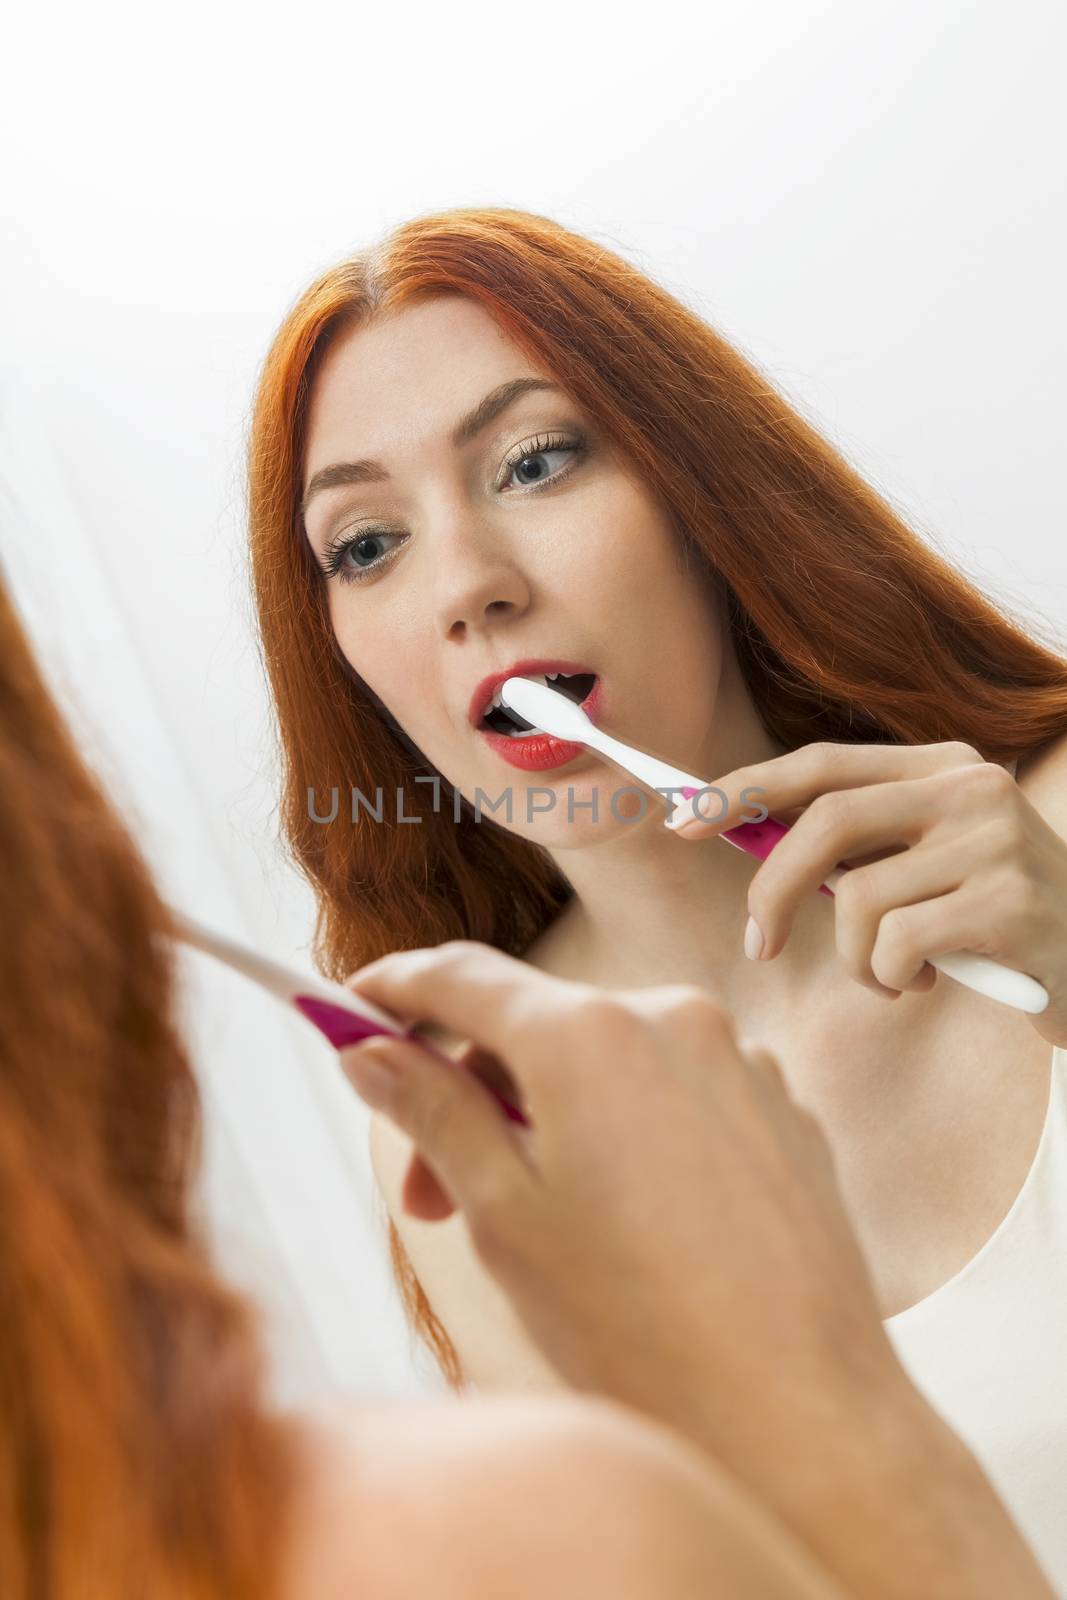 Close up Pretty Young Woman with Long Blond Hair Brushing her Teeth in Front a Mirror